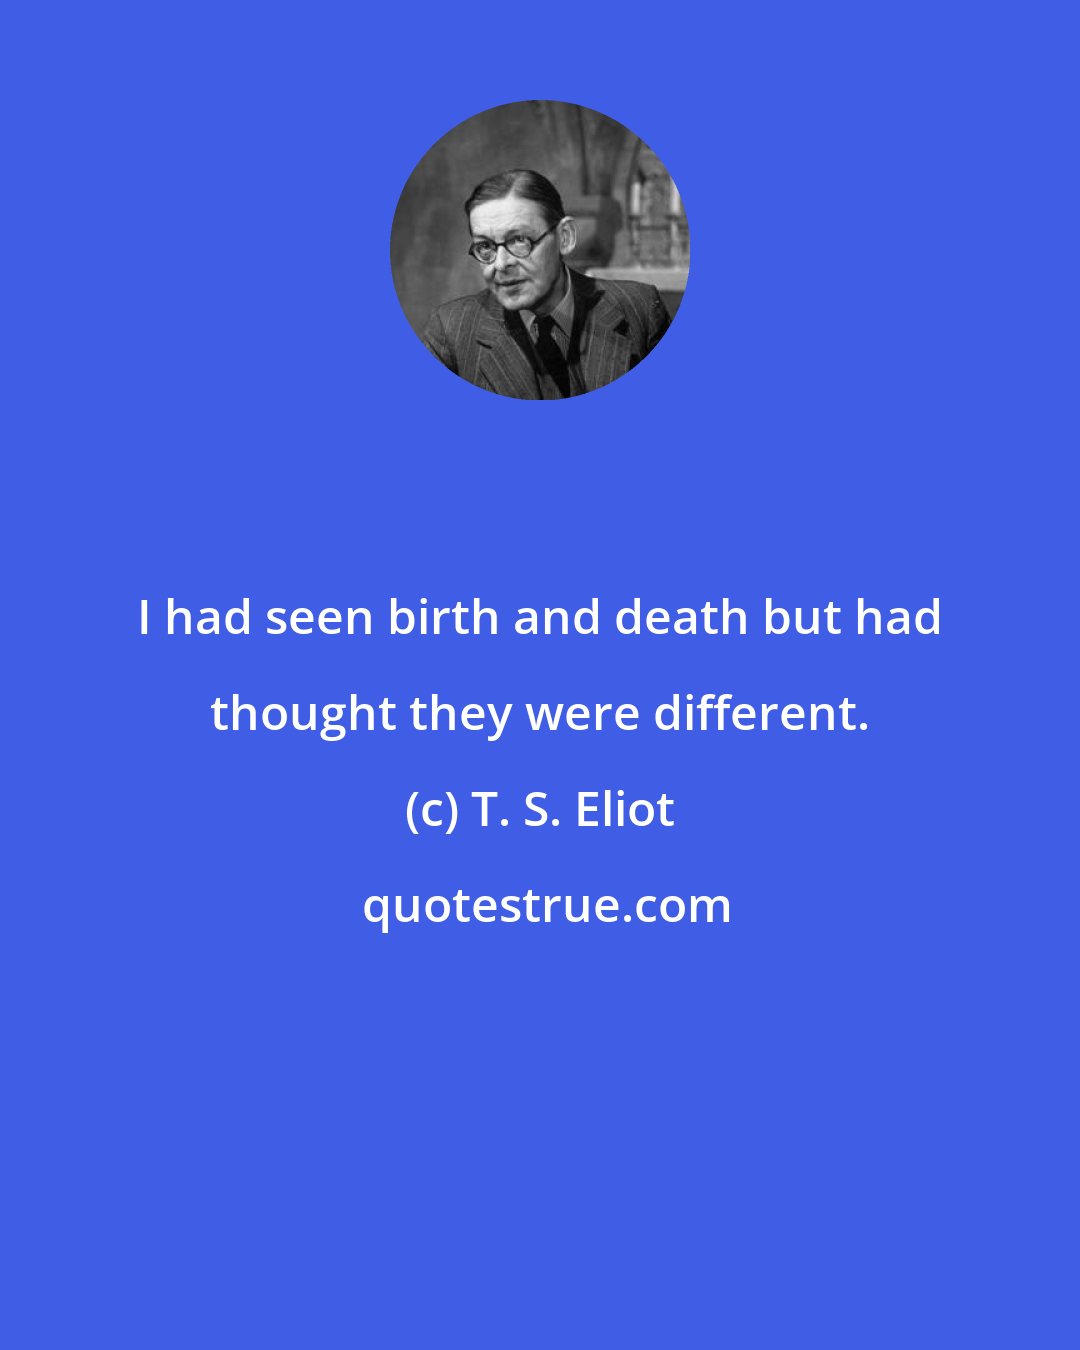 T. S. Eliot: I had seen birth and death but had thought they were different.